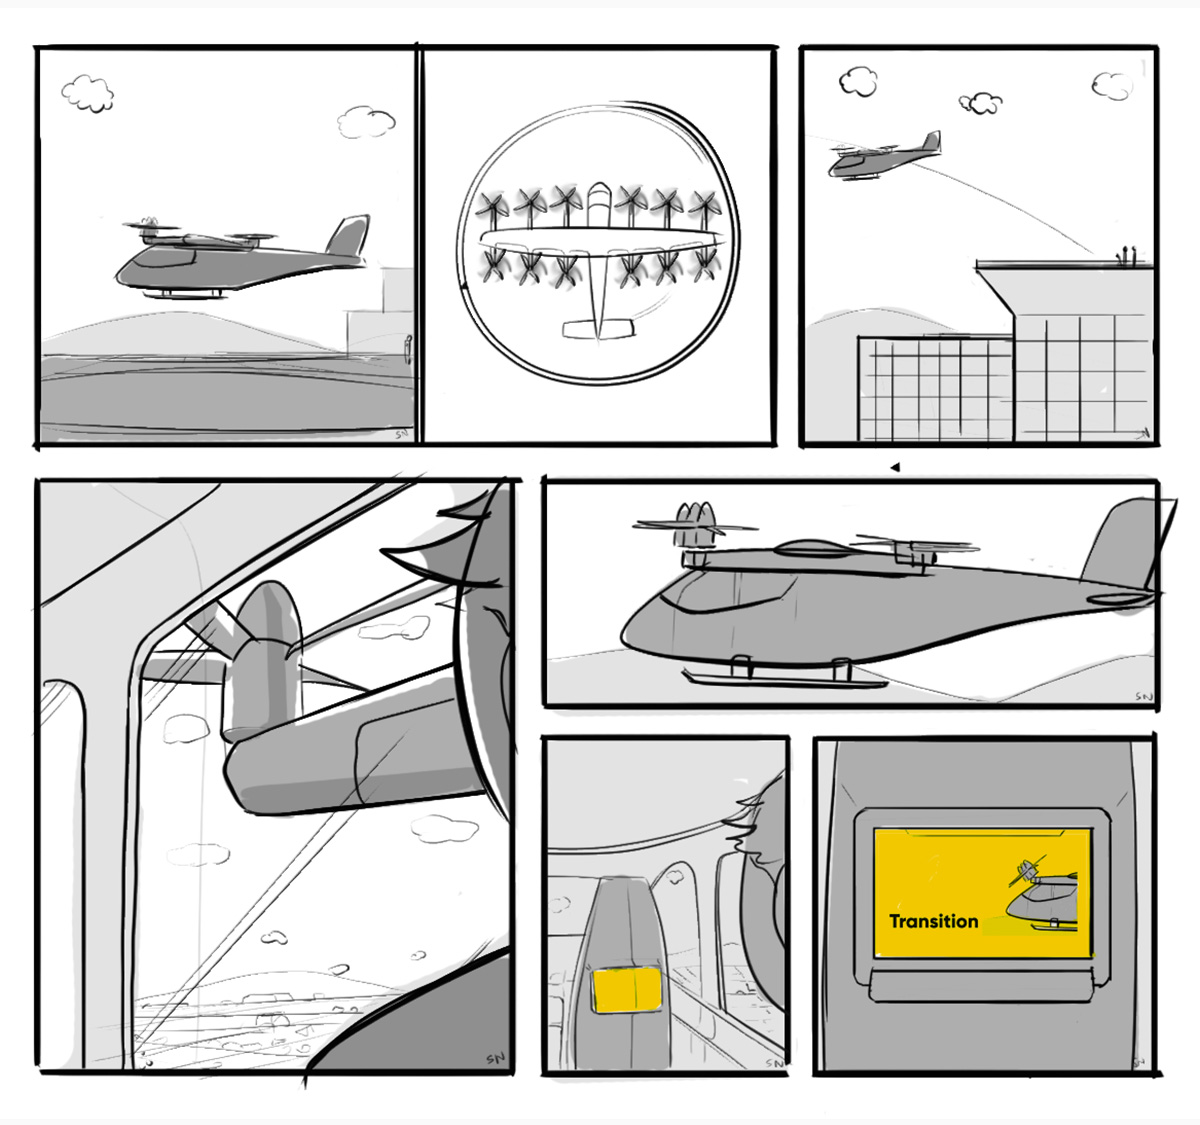 Take off and transition illustration